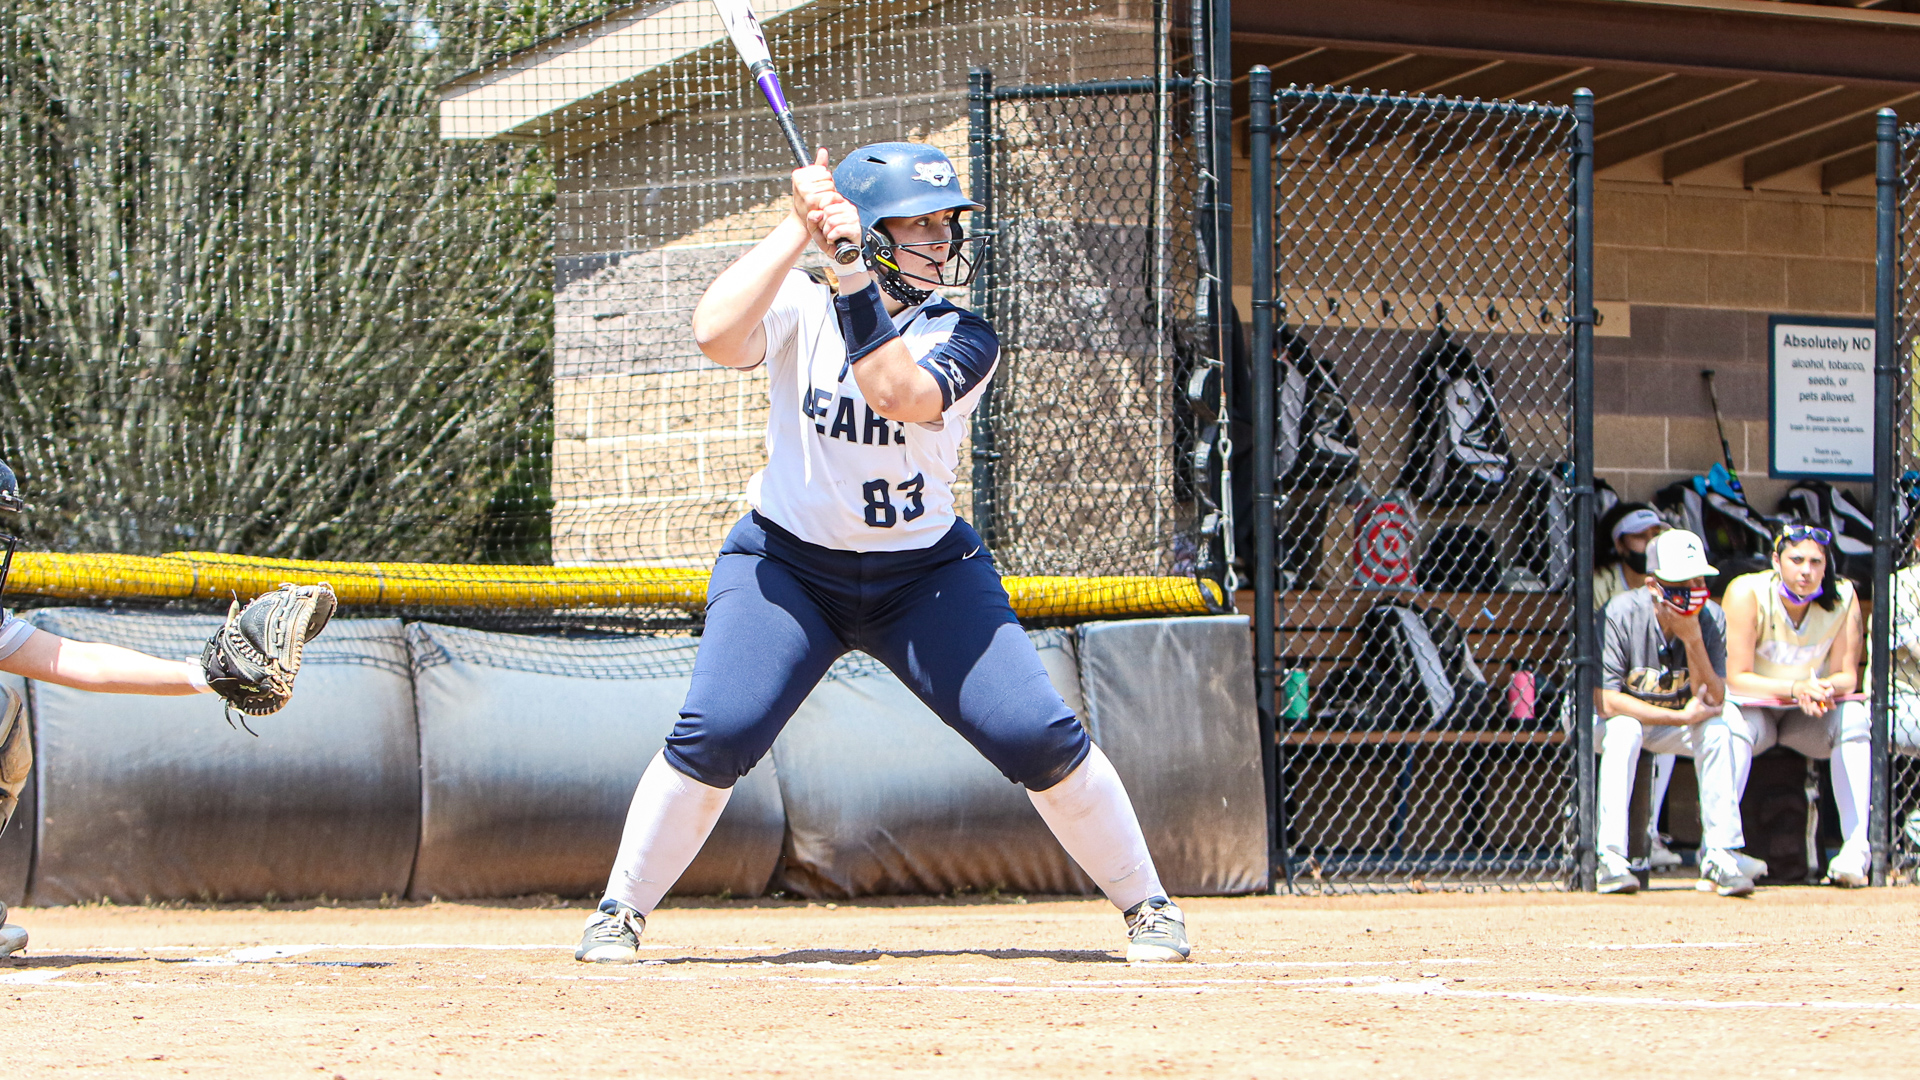 Hartwig Continues to Wield a Hot Bat as Softball Sweeps Mount Saint Vincent